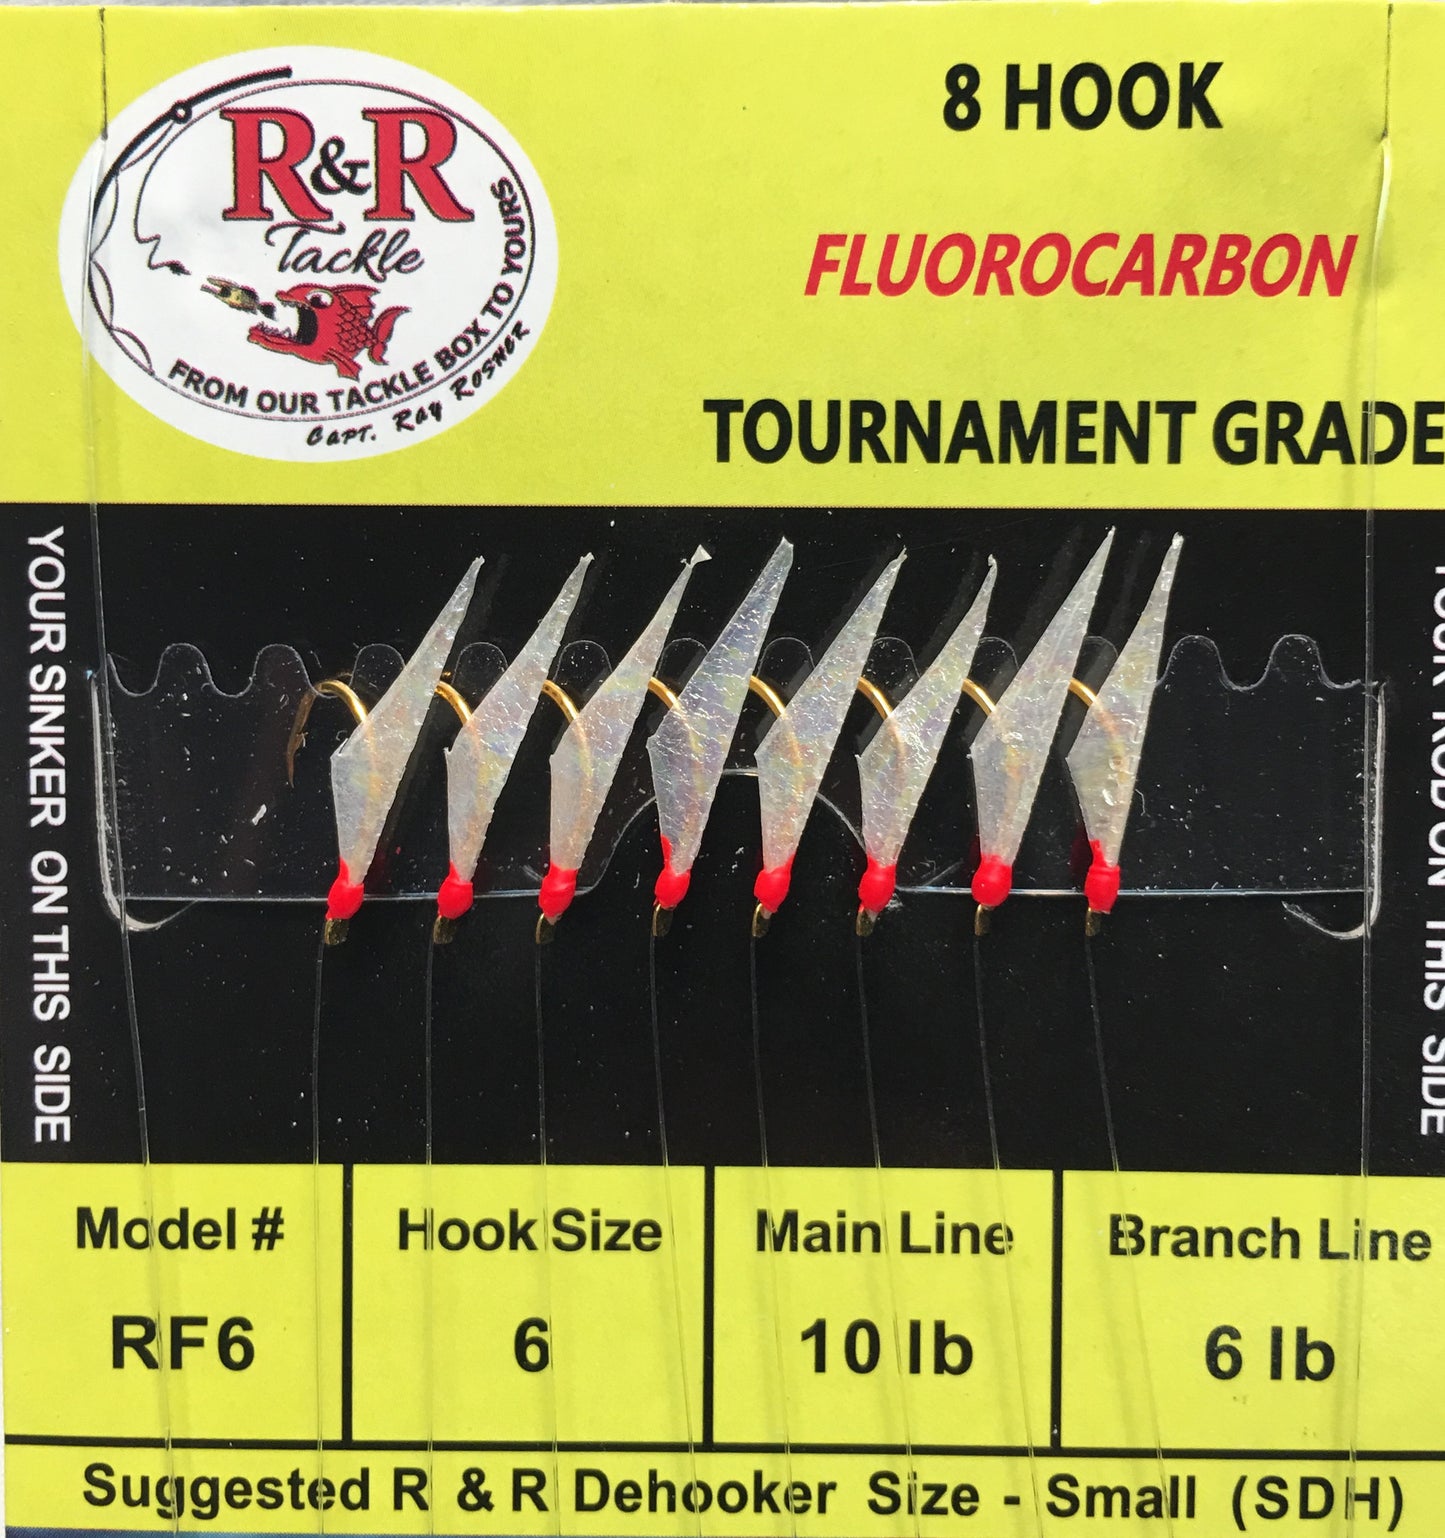 RF Pro Series Fluorocarbon Bait Rigs - 8 hooks with fish skin & red heads